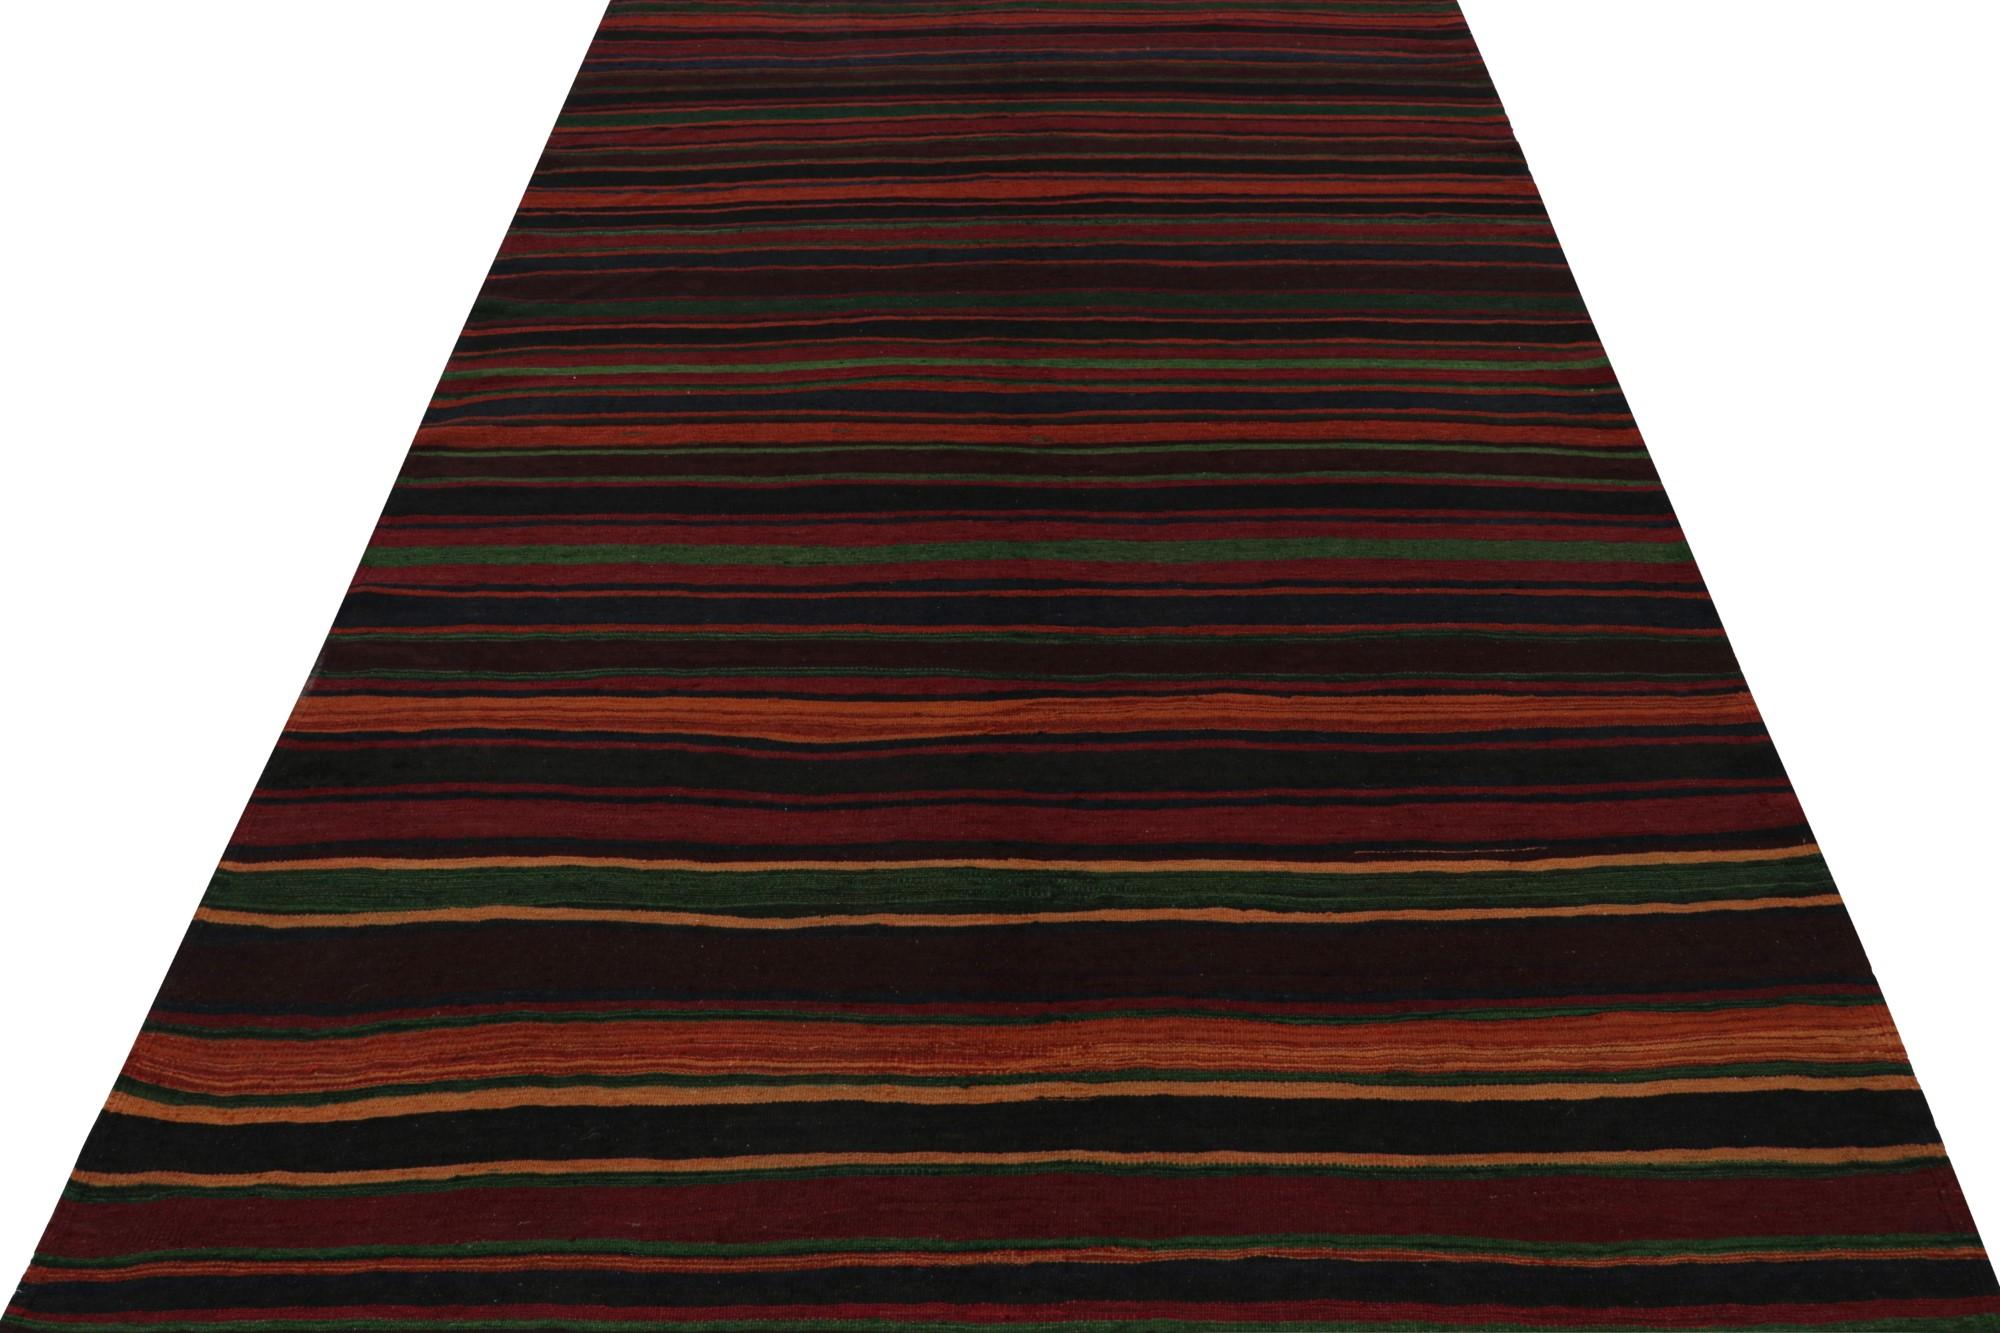 Hand-Knotted Vintage Afghan Tribal Kilim Rug with Colorful Stripes, from Rug & Kilim  For Sale